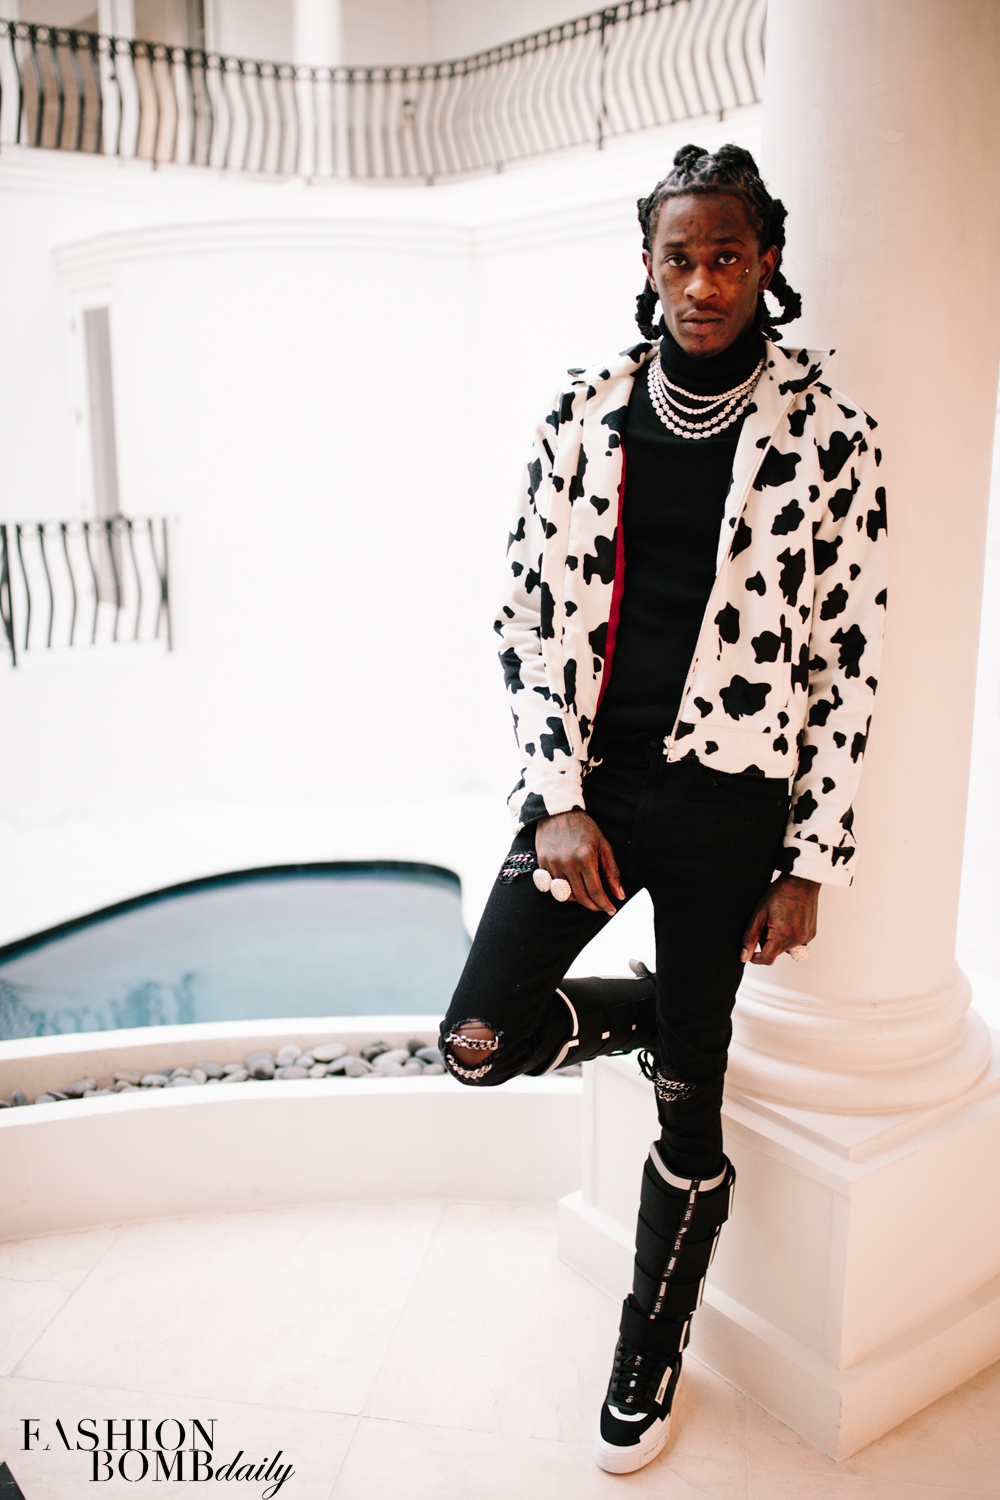 Young-Thug-by-Mary-Caroline-Mann-Fashion-Bomb-Daily-Jerrika-Karlae-Claire-Sulmers-Mercy-Mankind-Rayar-Jeans.jpg